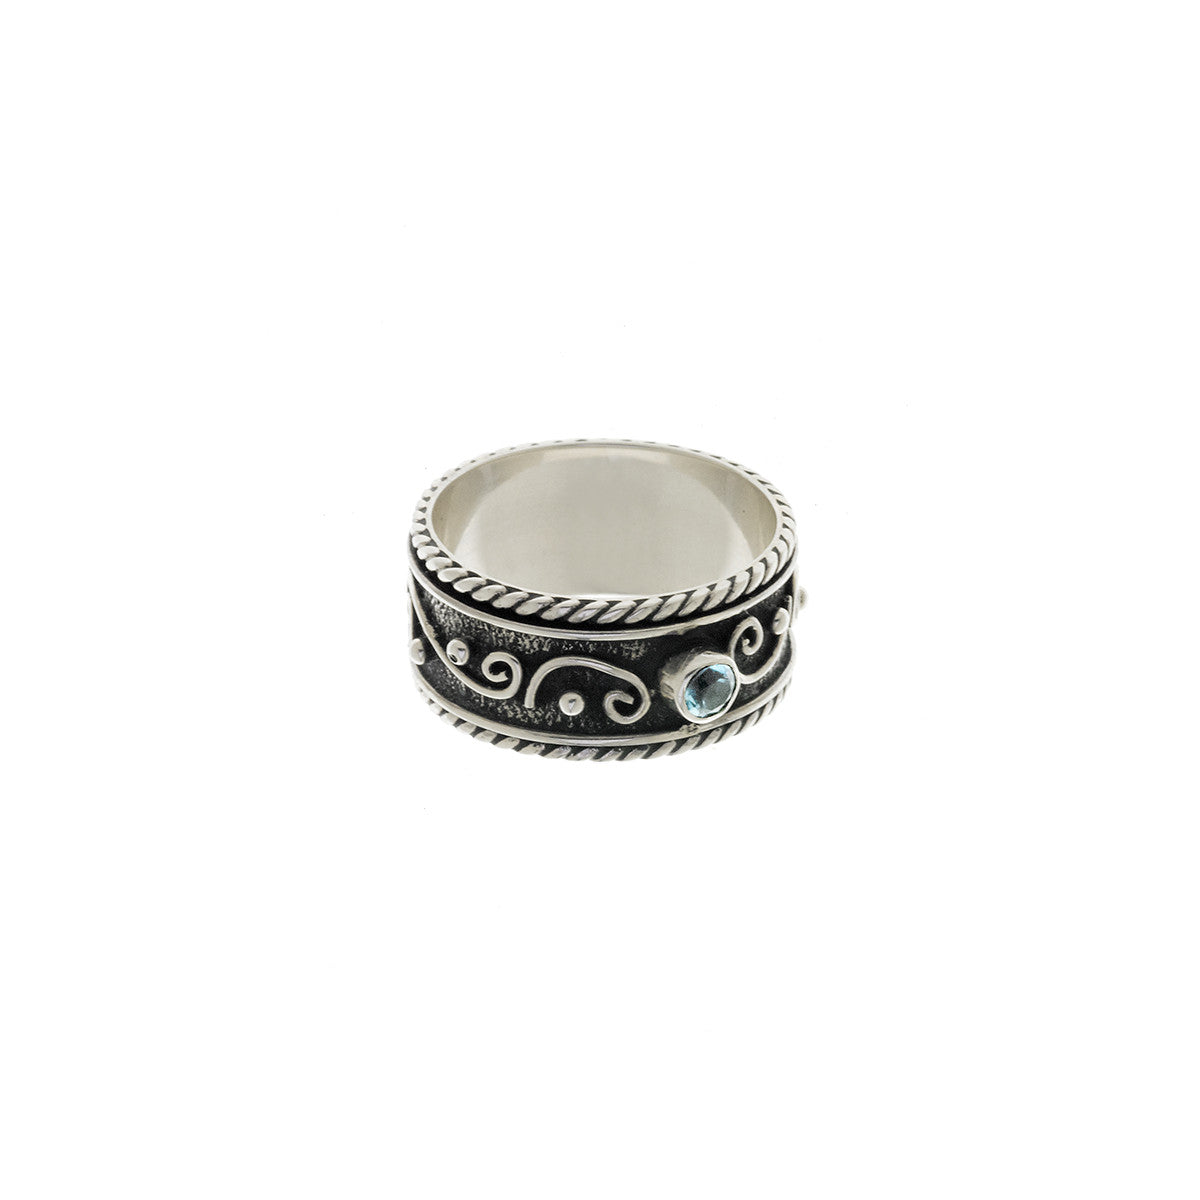 Ethos Sterling Silver And Blue Topaz Spin Ring - Cynthia Gale New York Jewelry